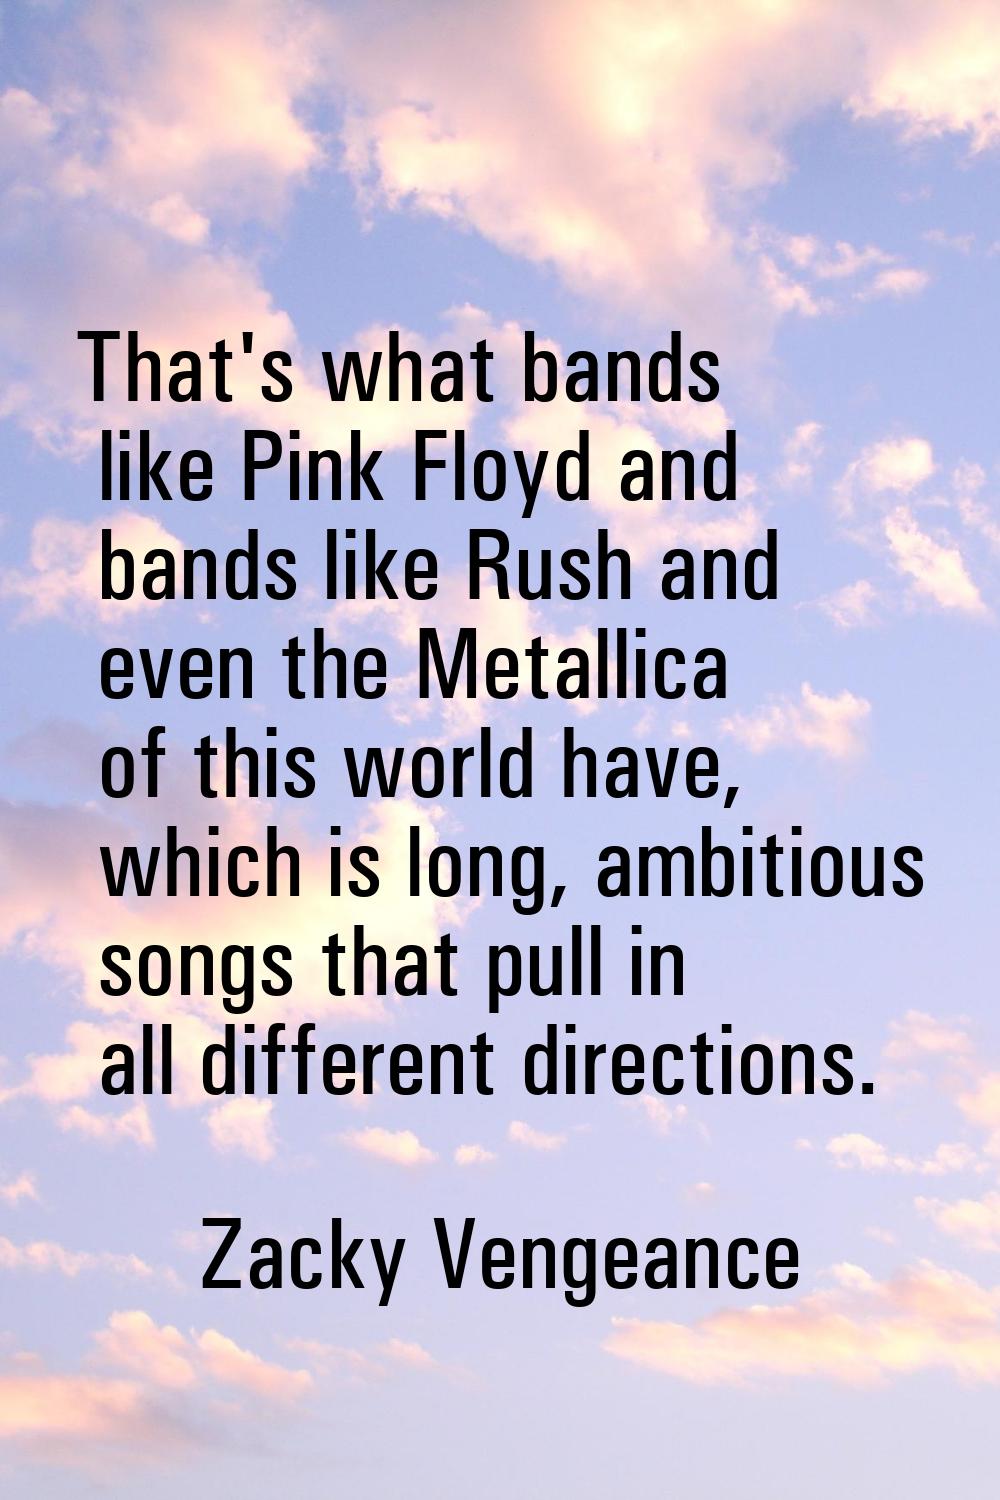 That's what bands like Pink Floyd and bands like Rush and even the Metallica of this world have, wh